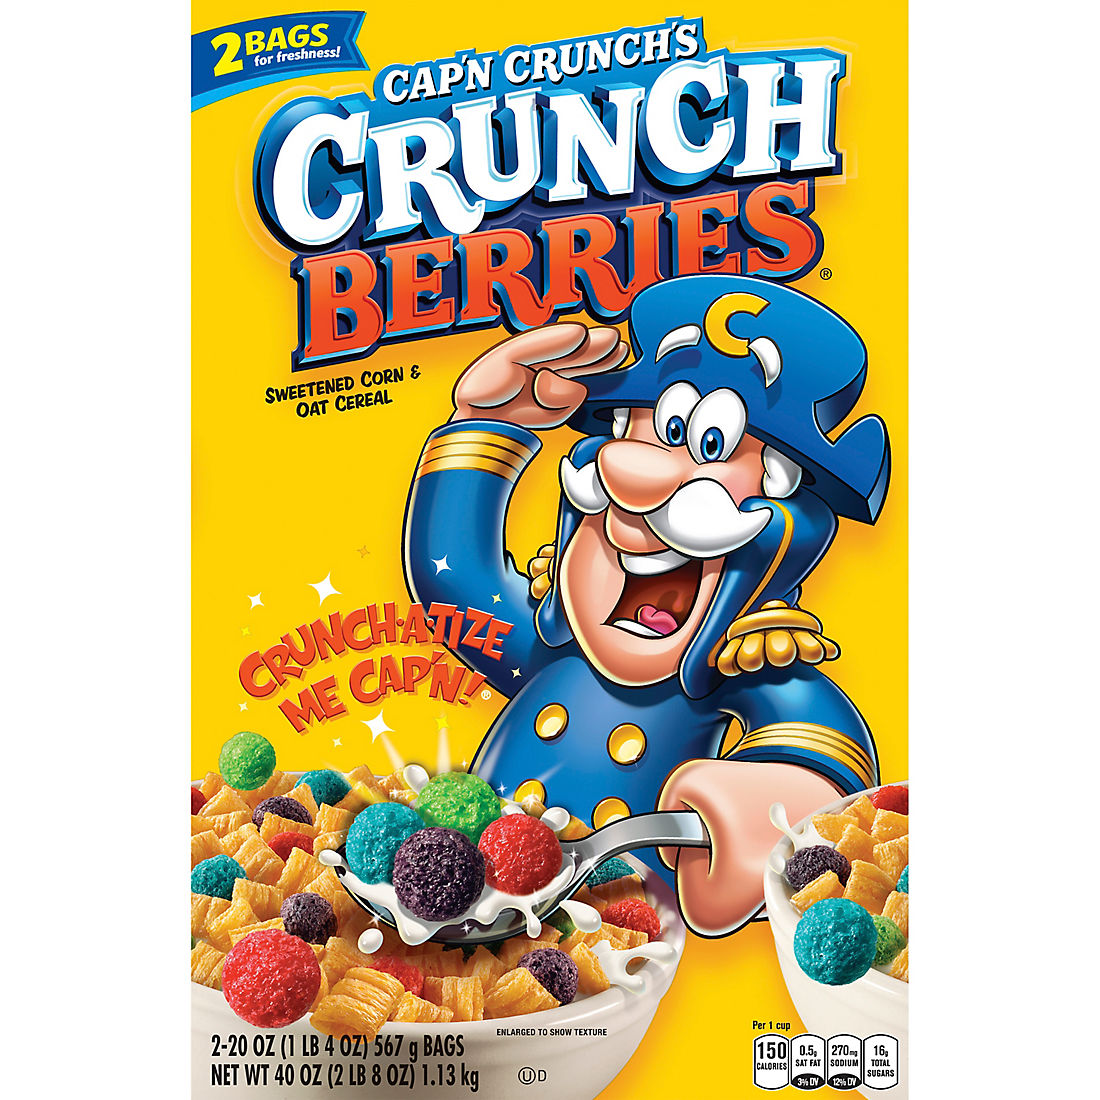 New 2020 Cap'n Crunch Cereal Mail in Away Adventure Figure Ship Captain 